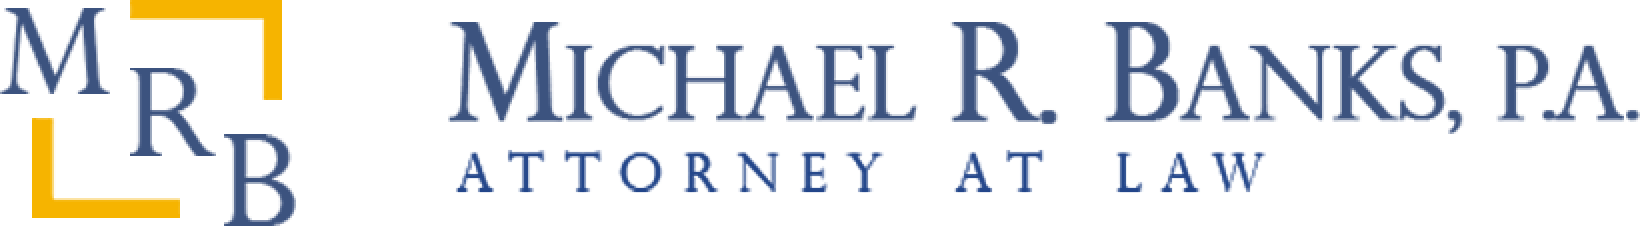 Michael R. Banks, P.A. - Martin County Estate Planning Law Firm